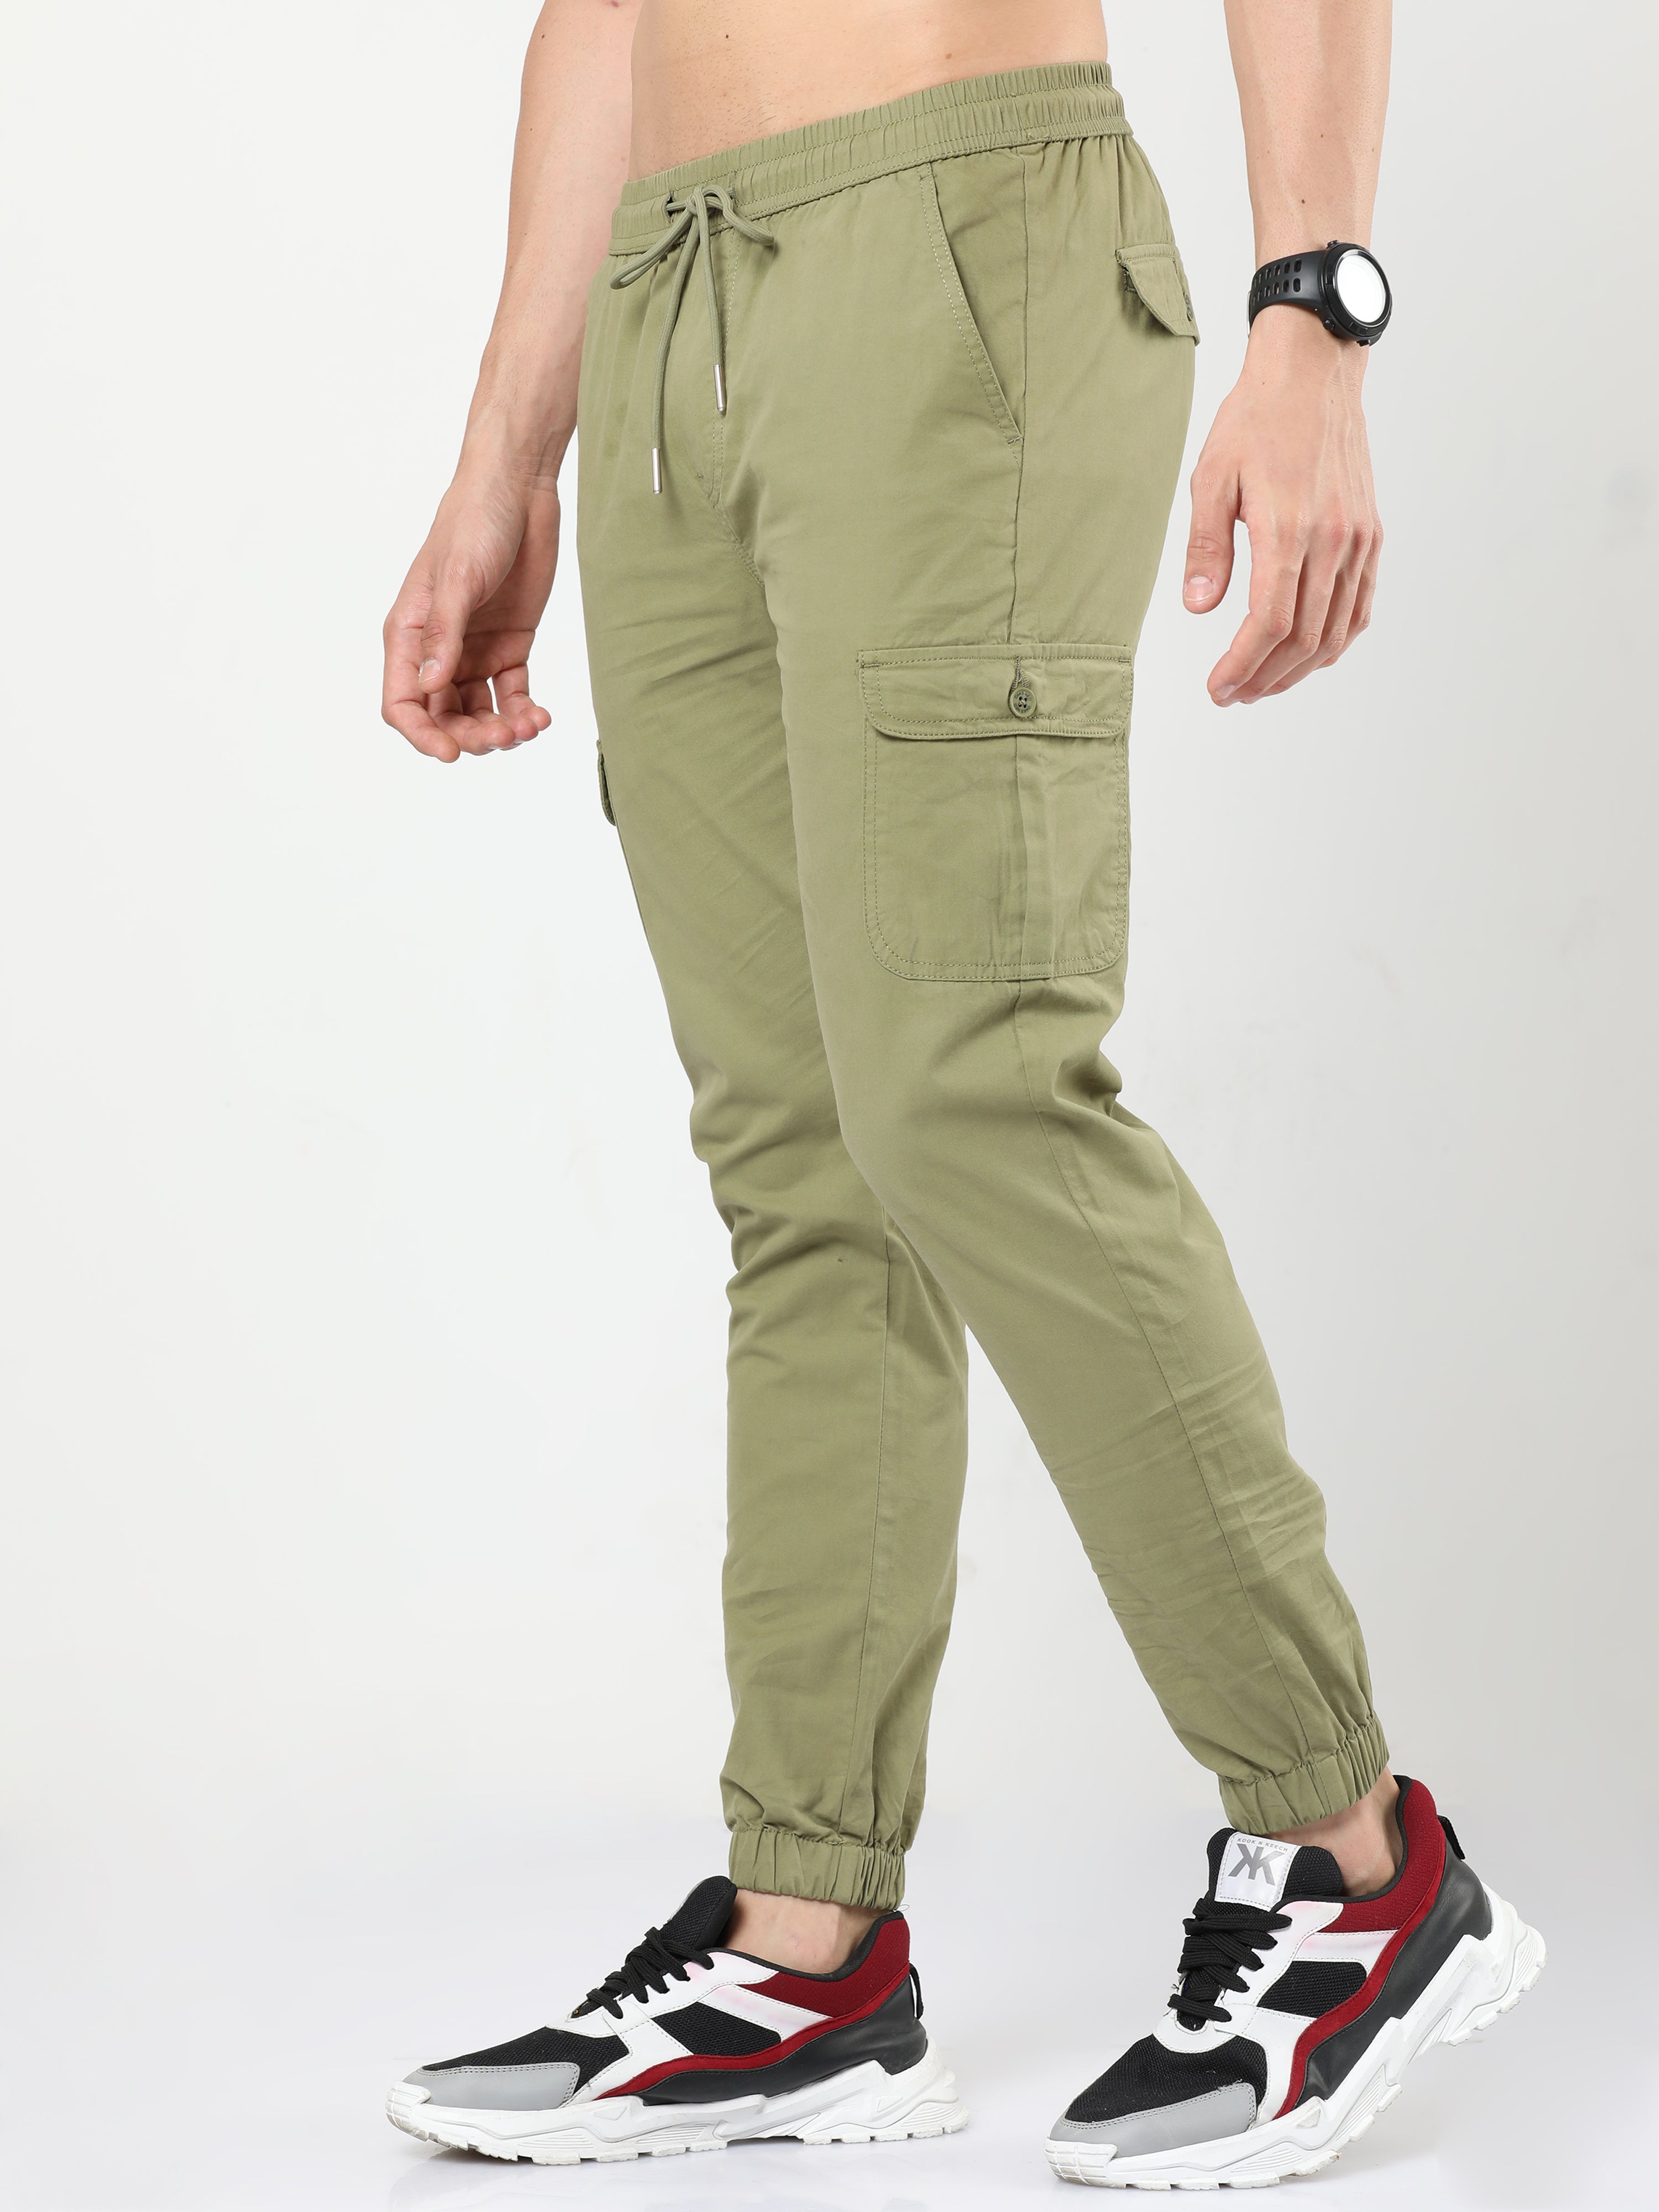 Buy OLIVE GREEN Trousers & Pants for Men by max Online | Ajio.com